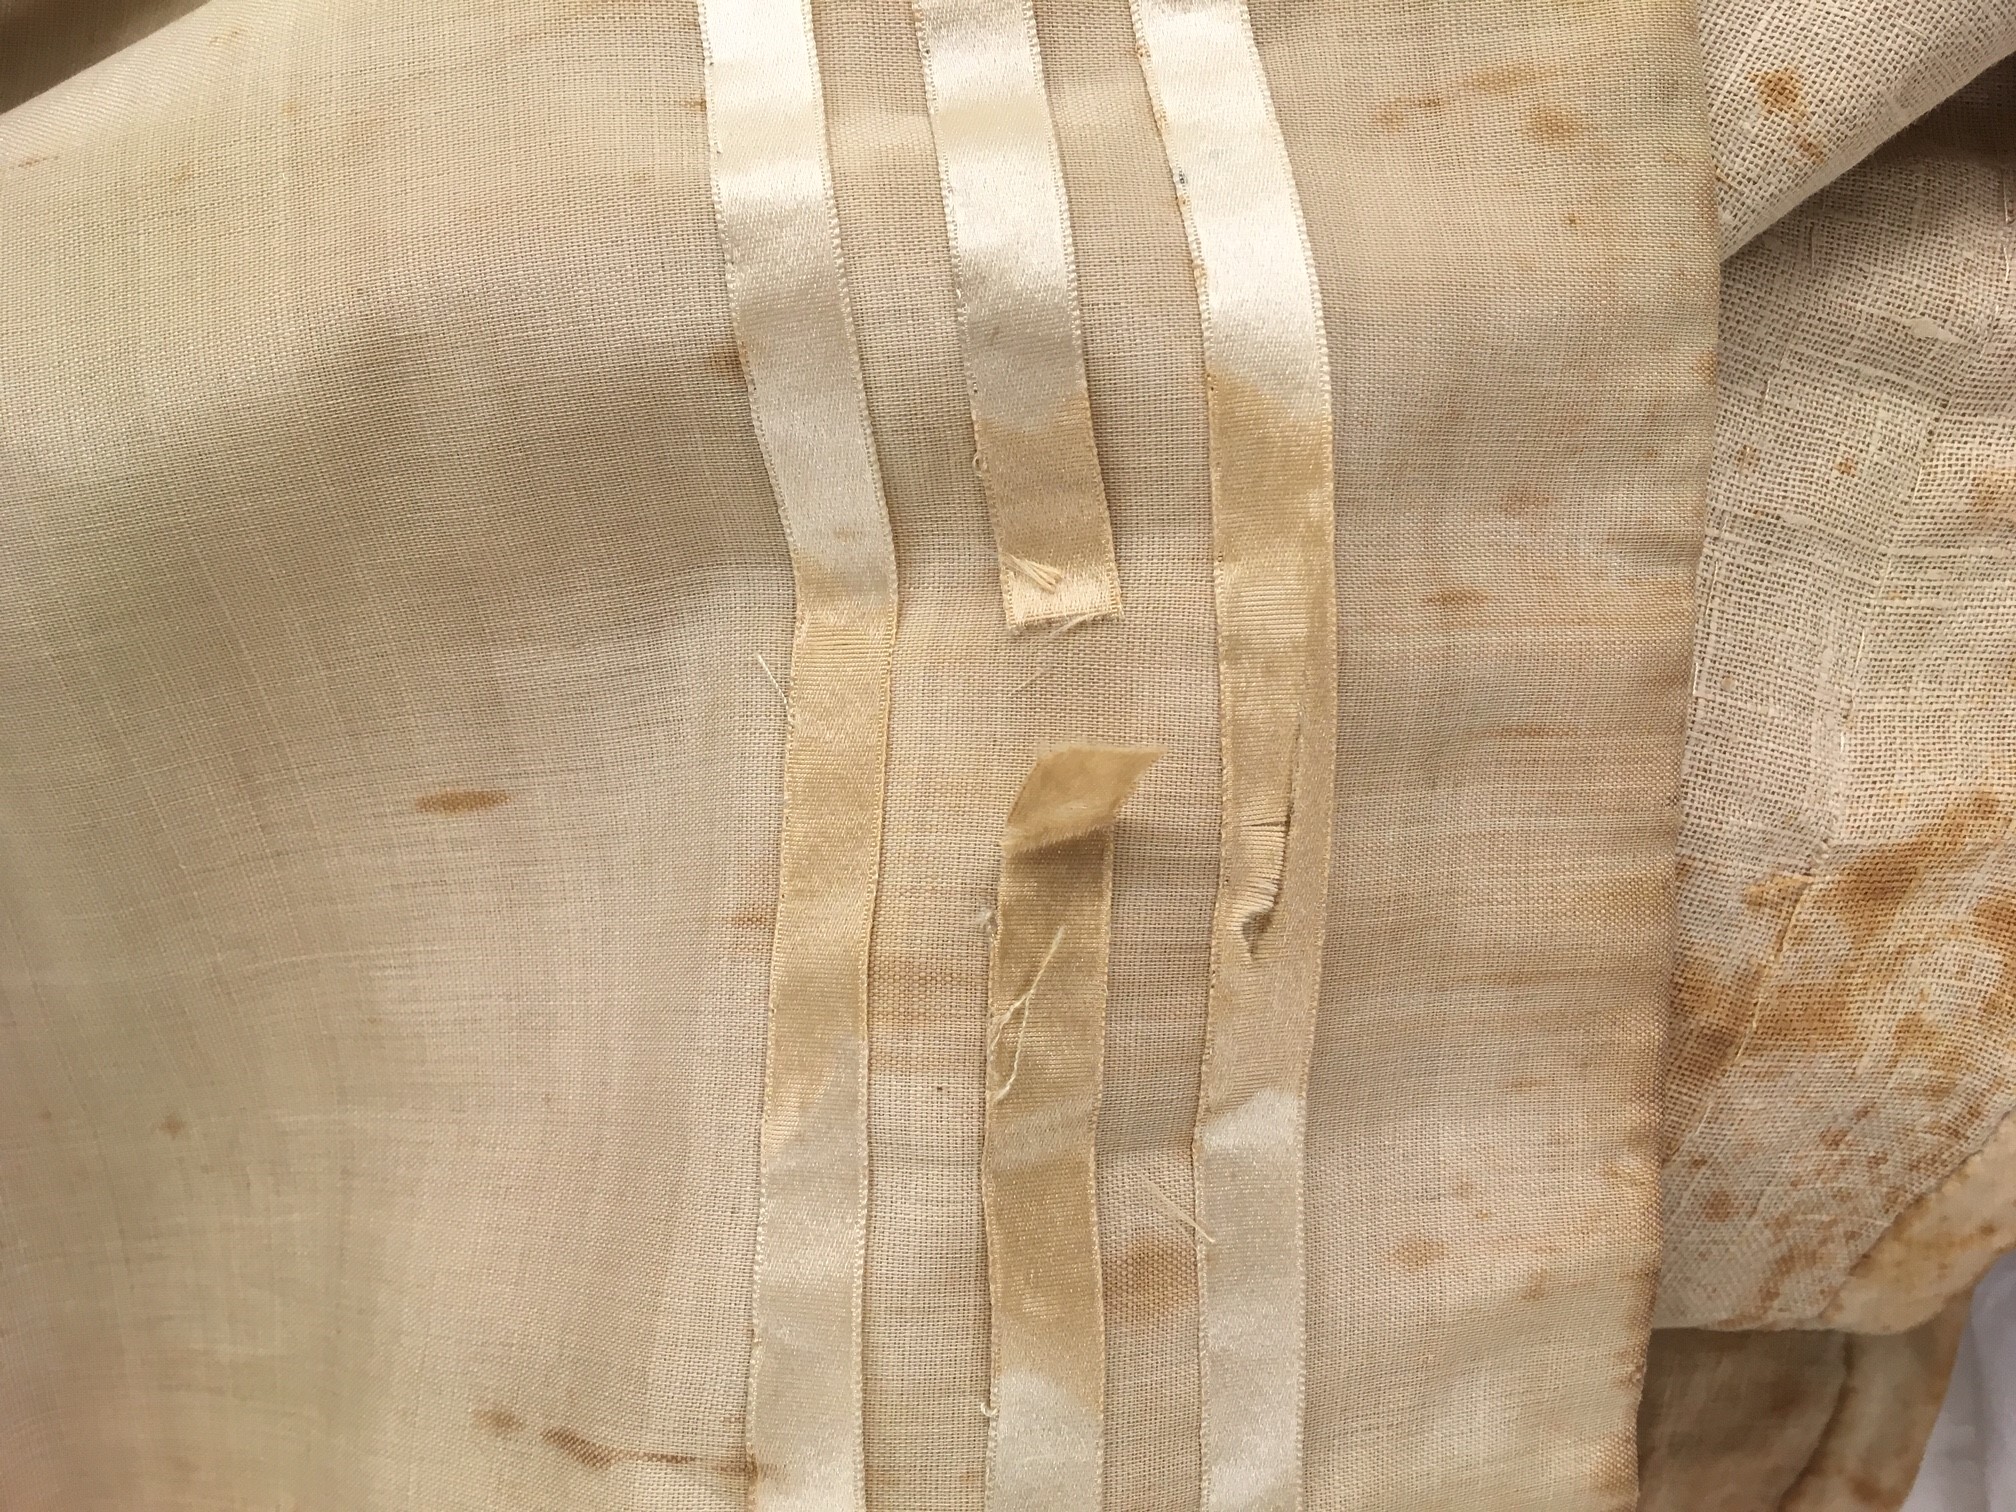 damaged area of the dress